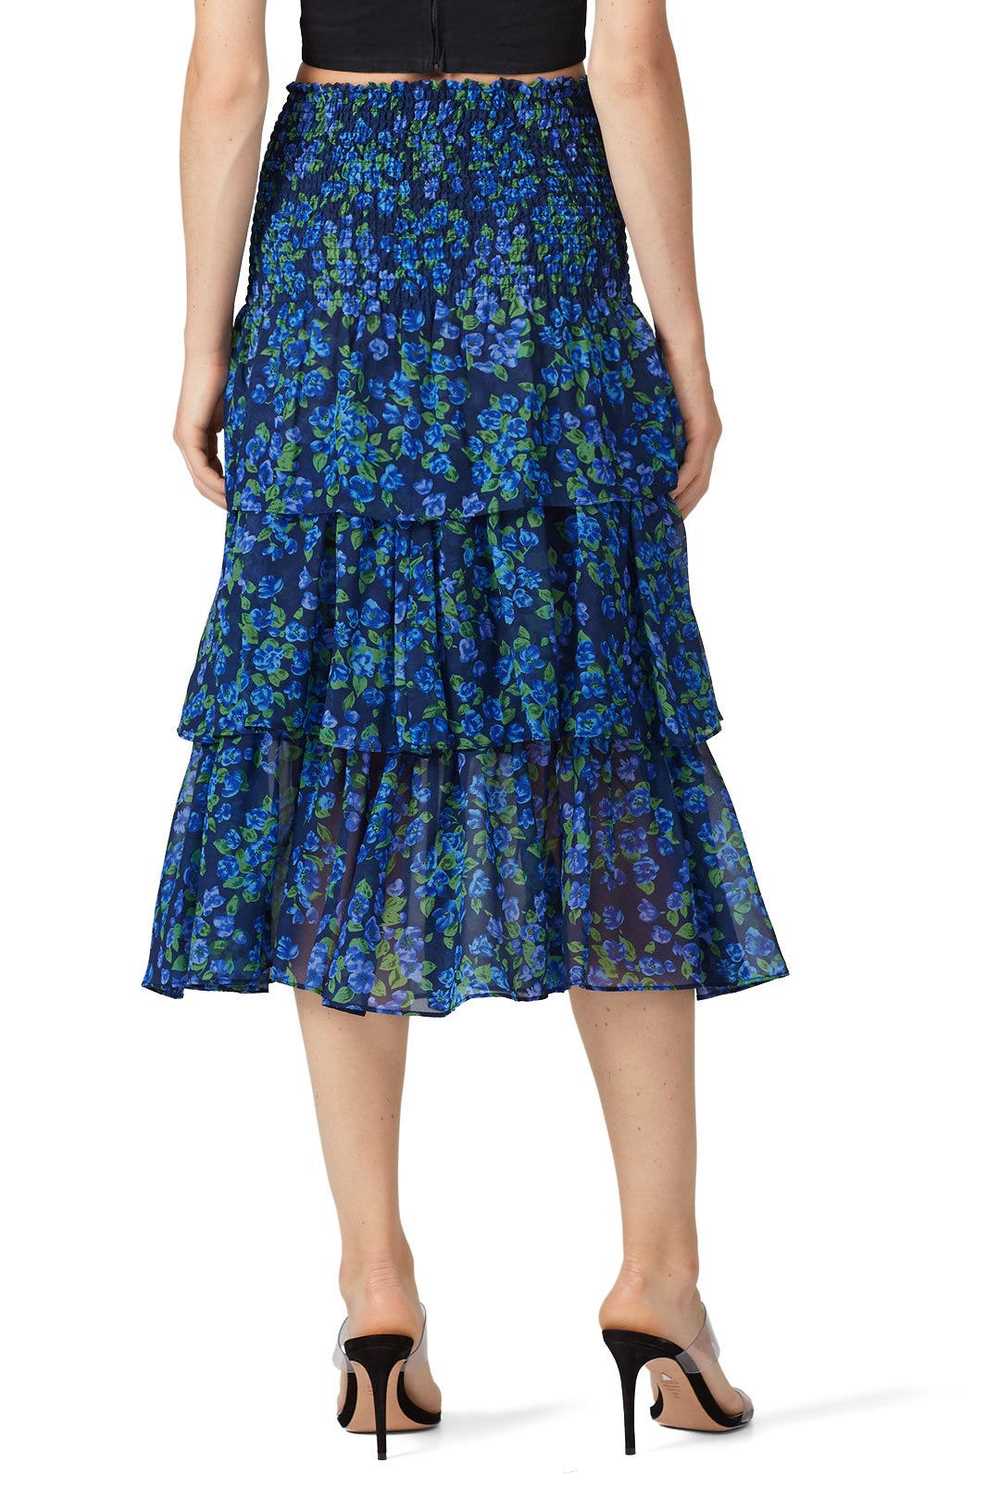 The Kooples Floral Tiered Skirt - image 3